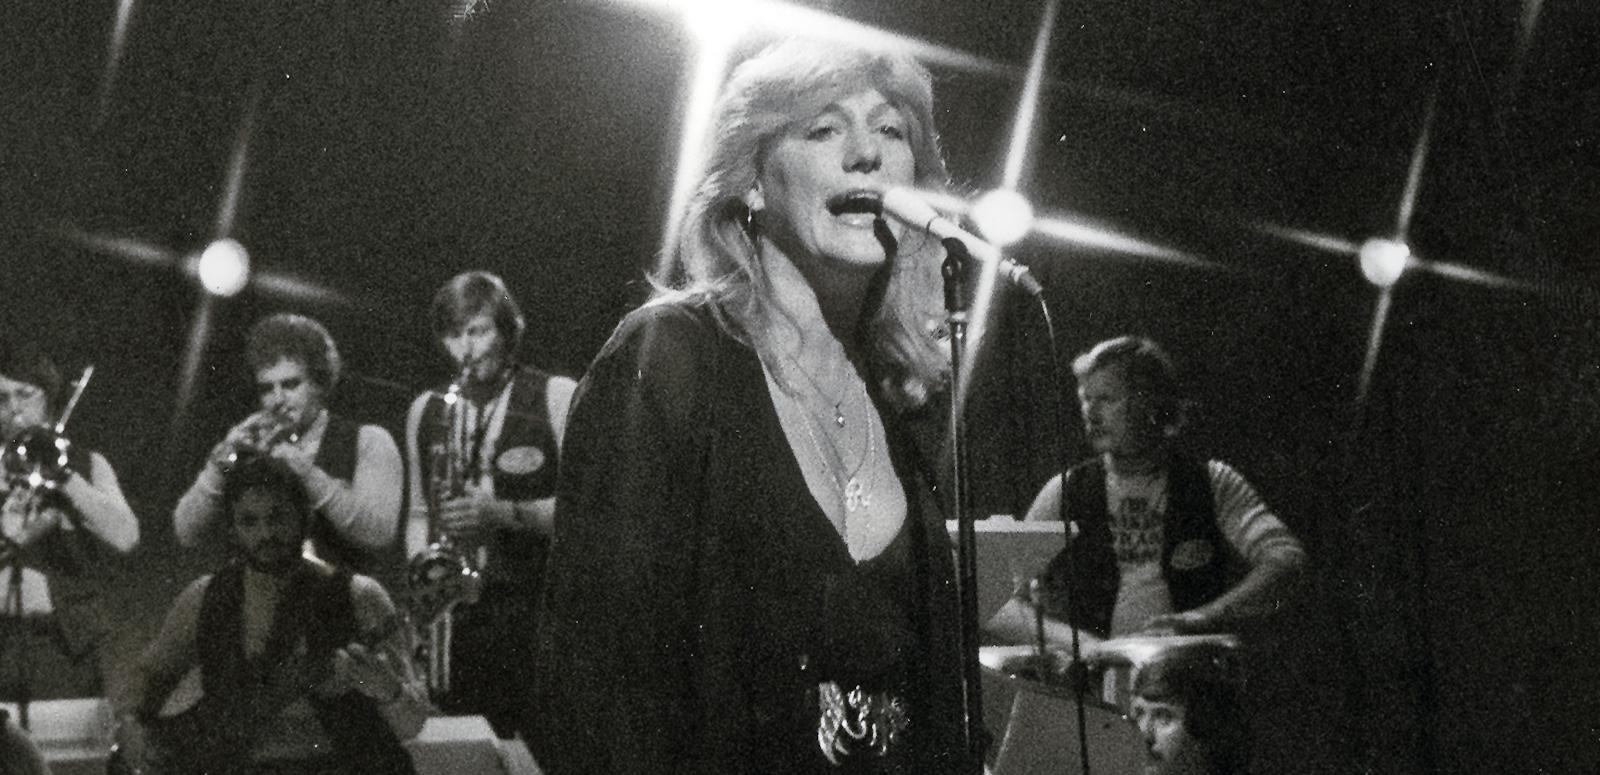 Singer Renee Geyer pictured from the waist up, singing into a microphone with band members in the background behind her.